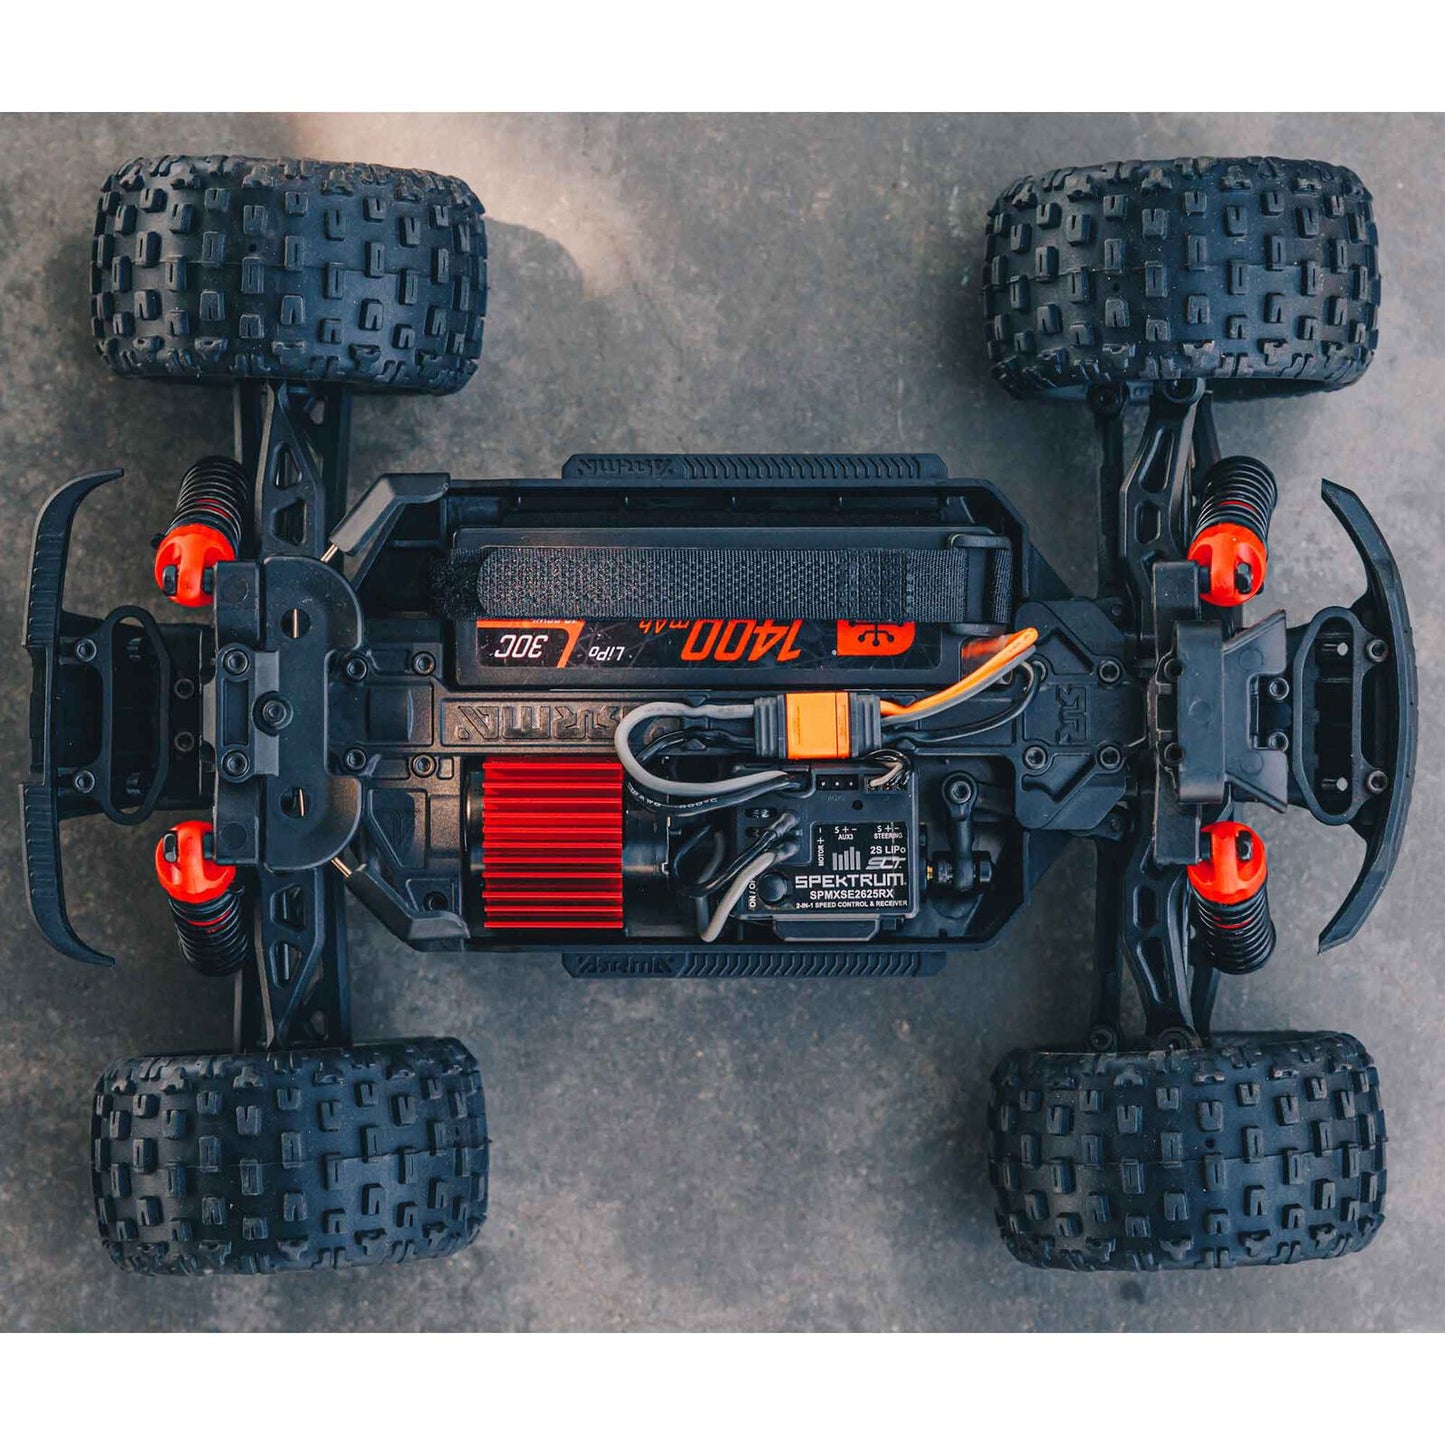 ARRMA ARA2102T2 1/18 GRANITE GROM MEGA 380 Brushed 4X4 Monster Truck RTR with Battery & Charger, Red